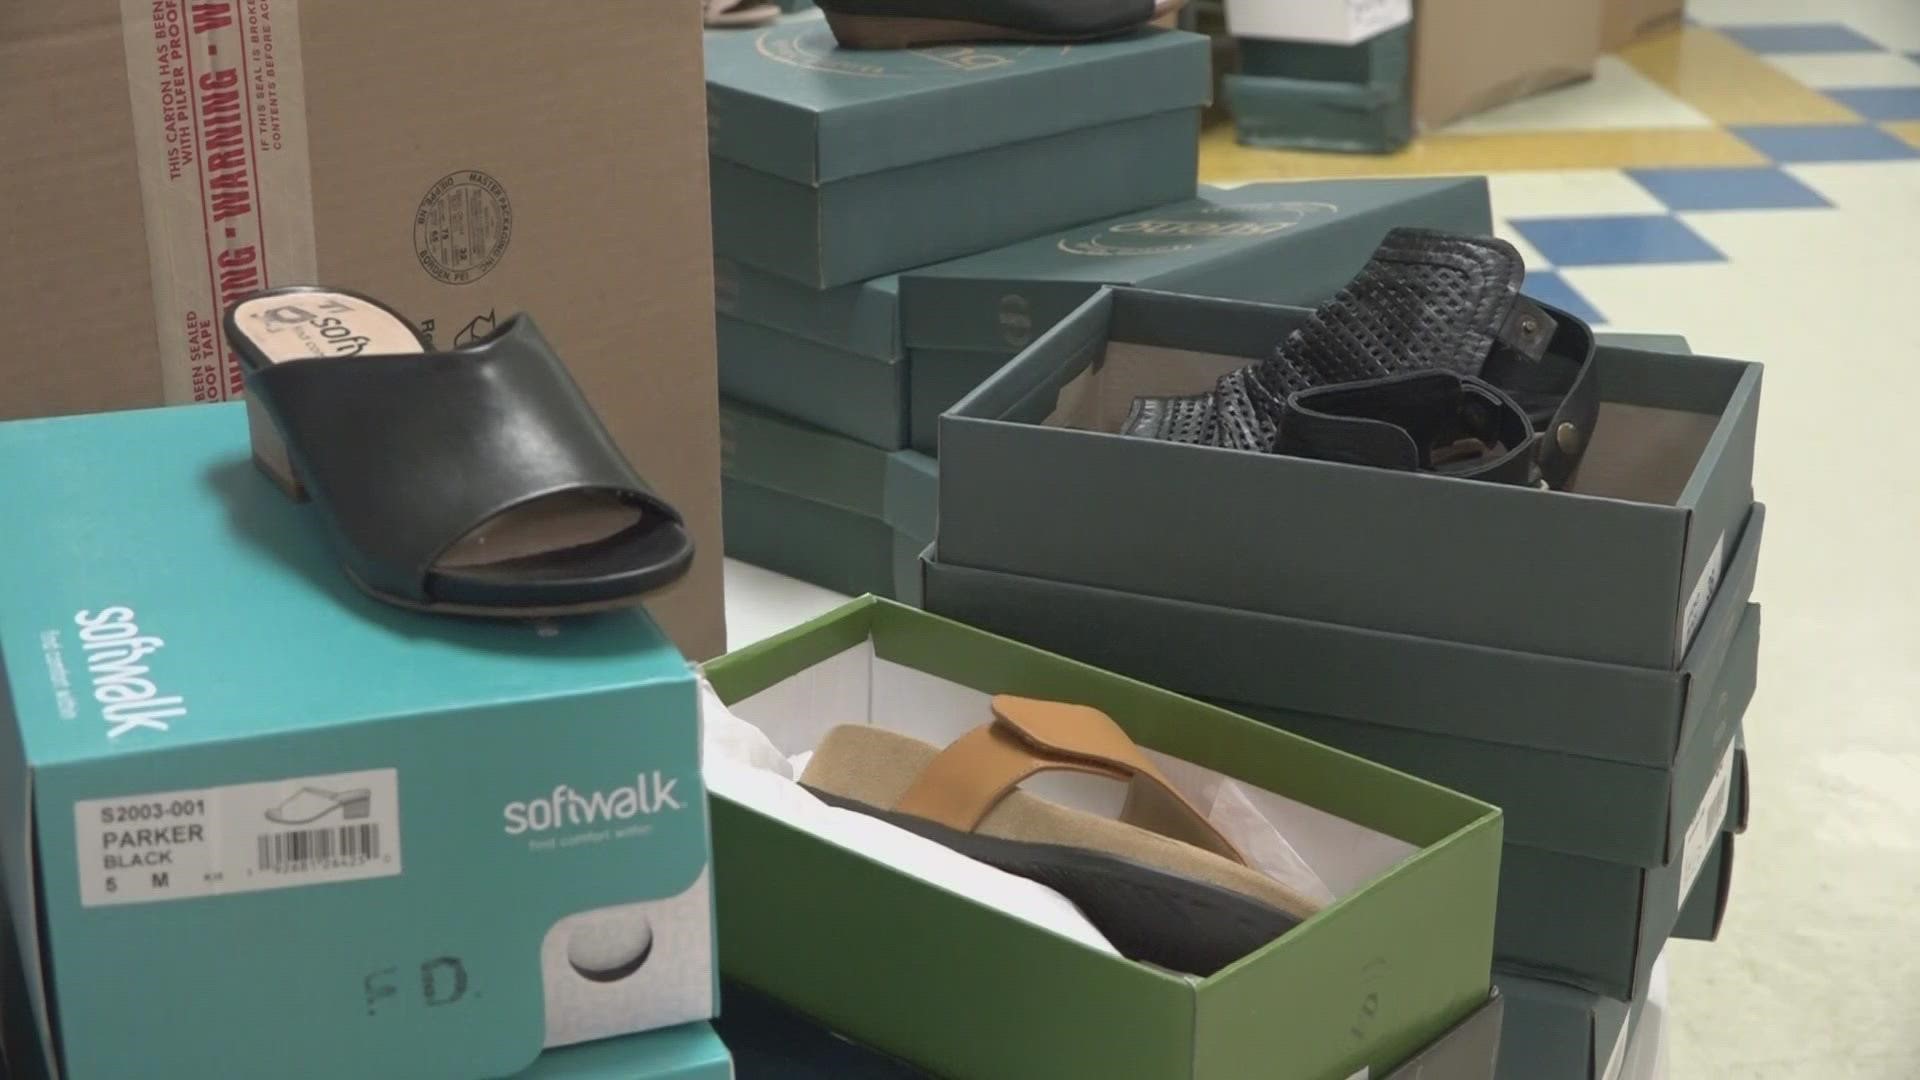 Holy Family Catholic Church had over 2,000 pairs of women's shoes donated to their thrift shop from a local distributor, Phoenix Footwear.